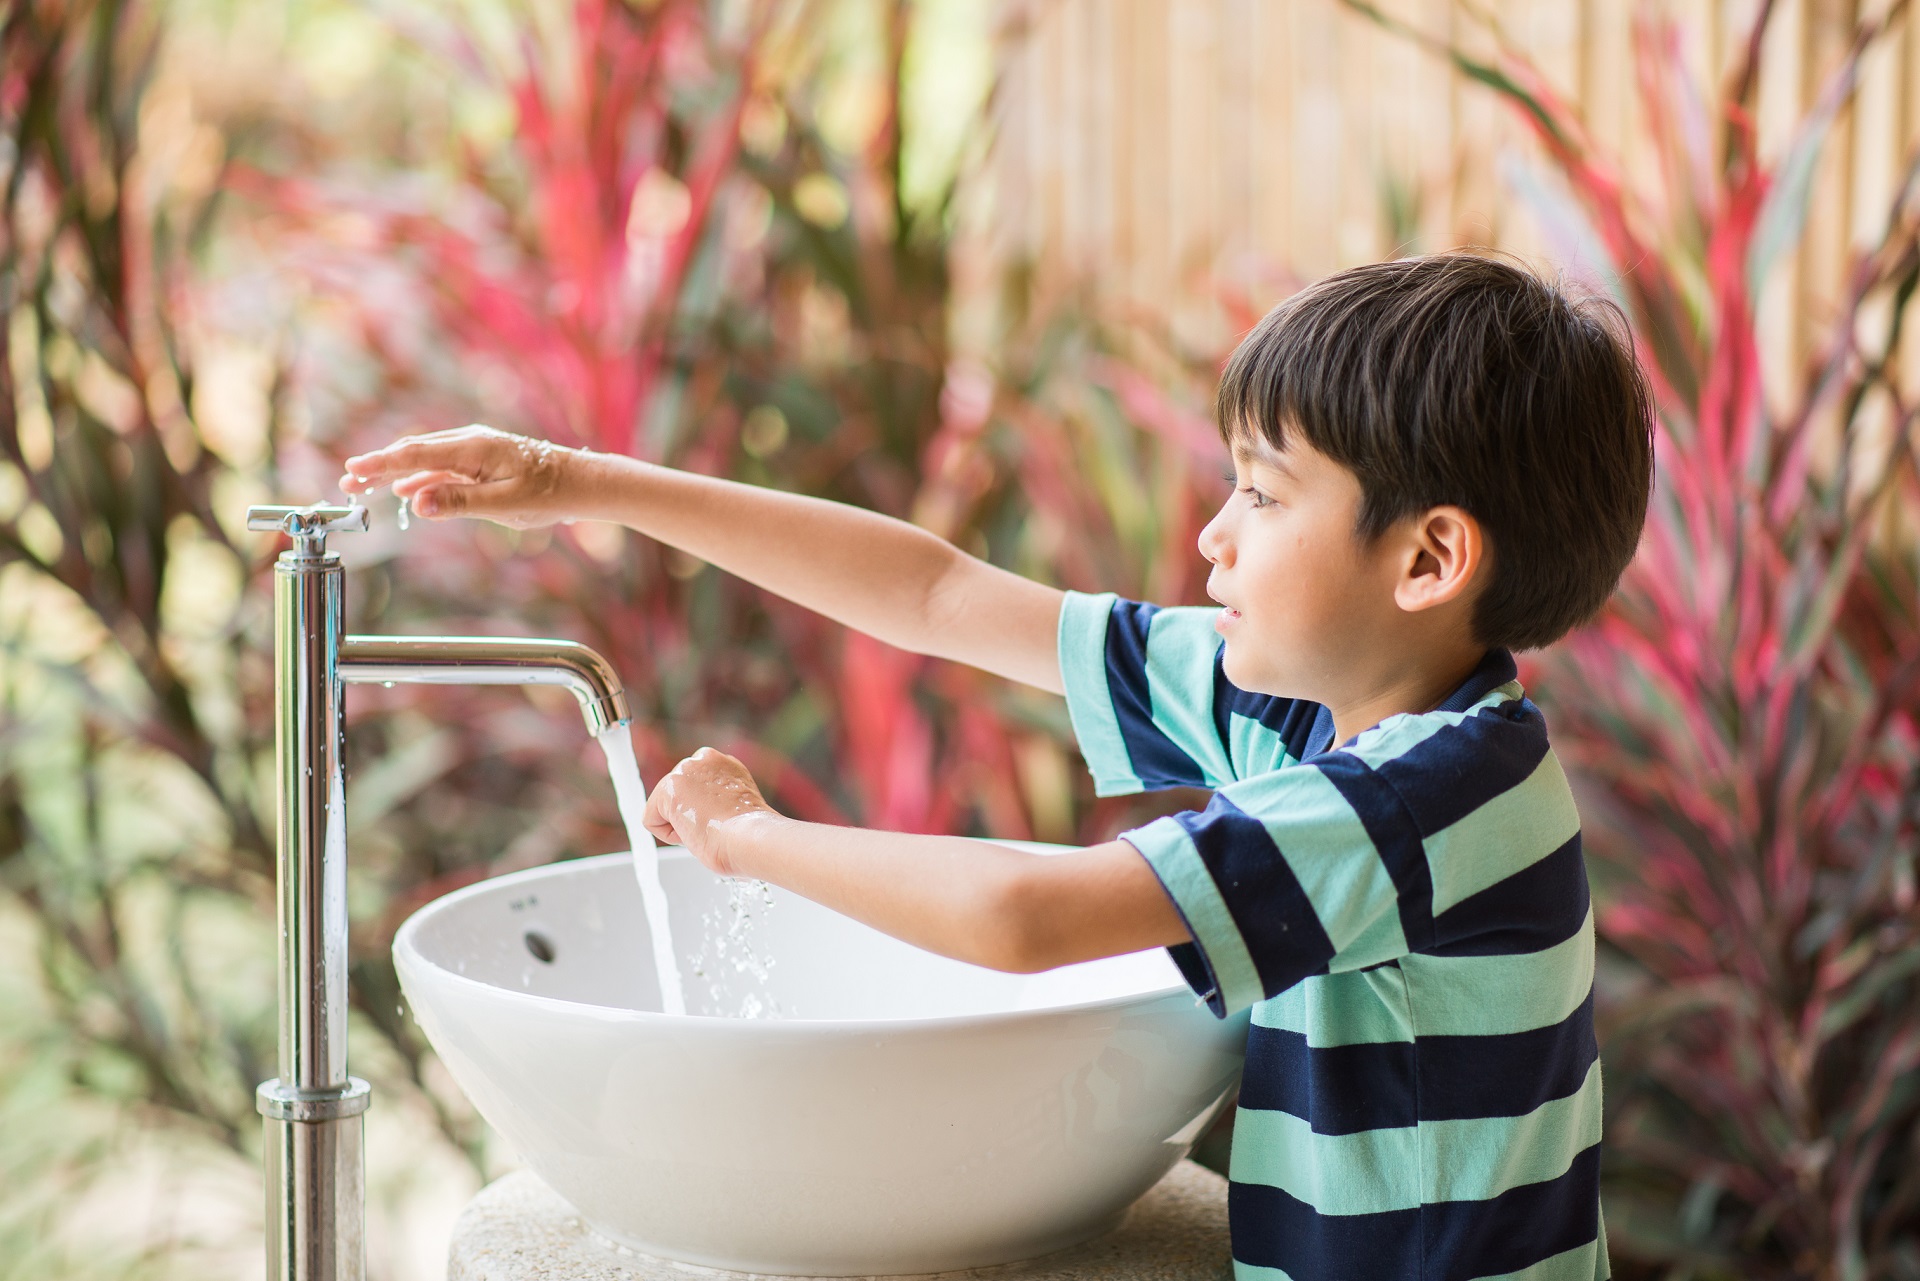 instilling good personal hygiene in children is vital for their health and wellbeing.